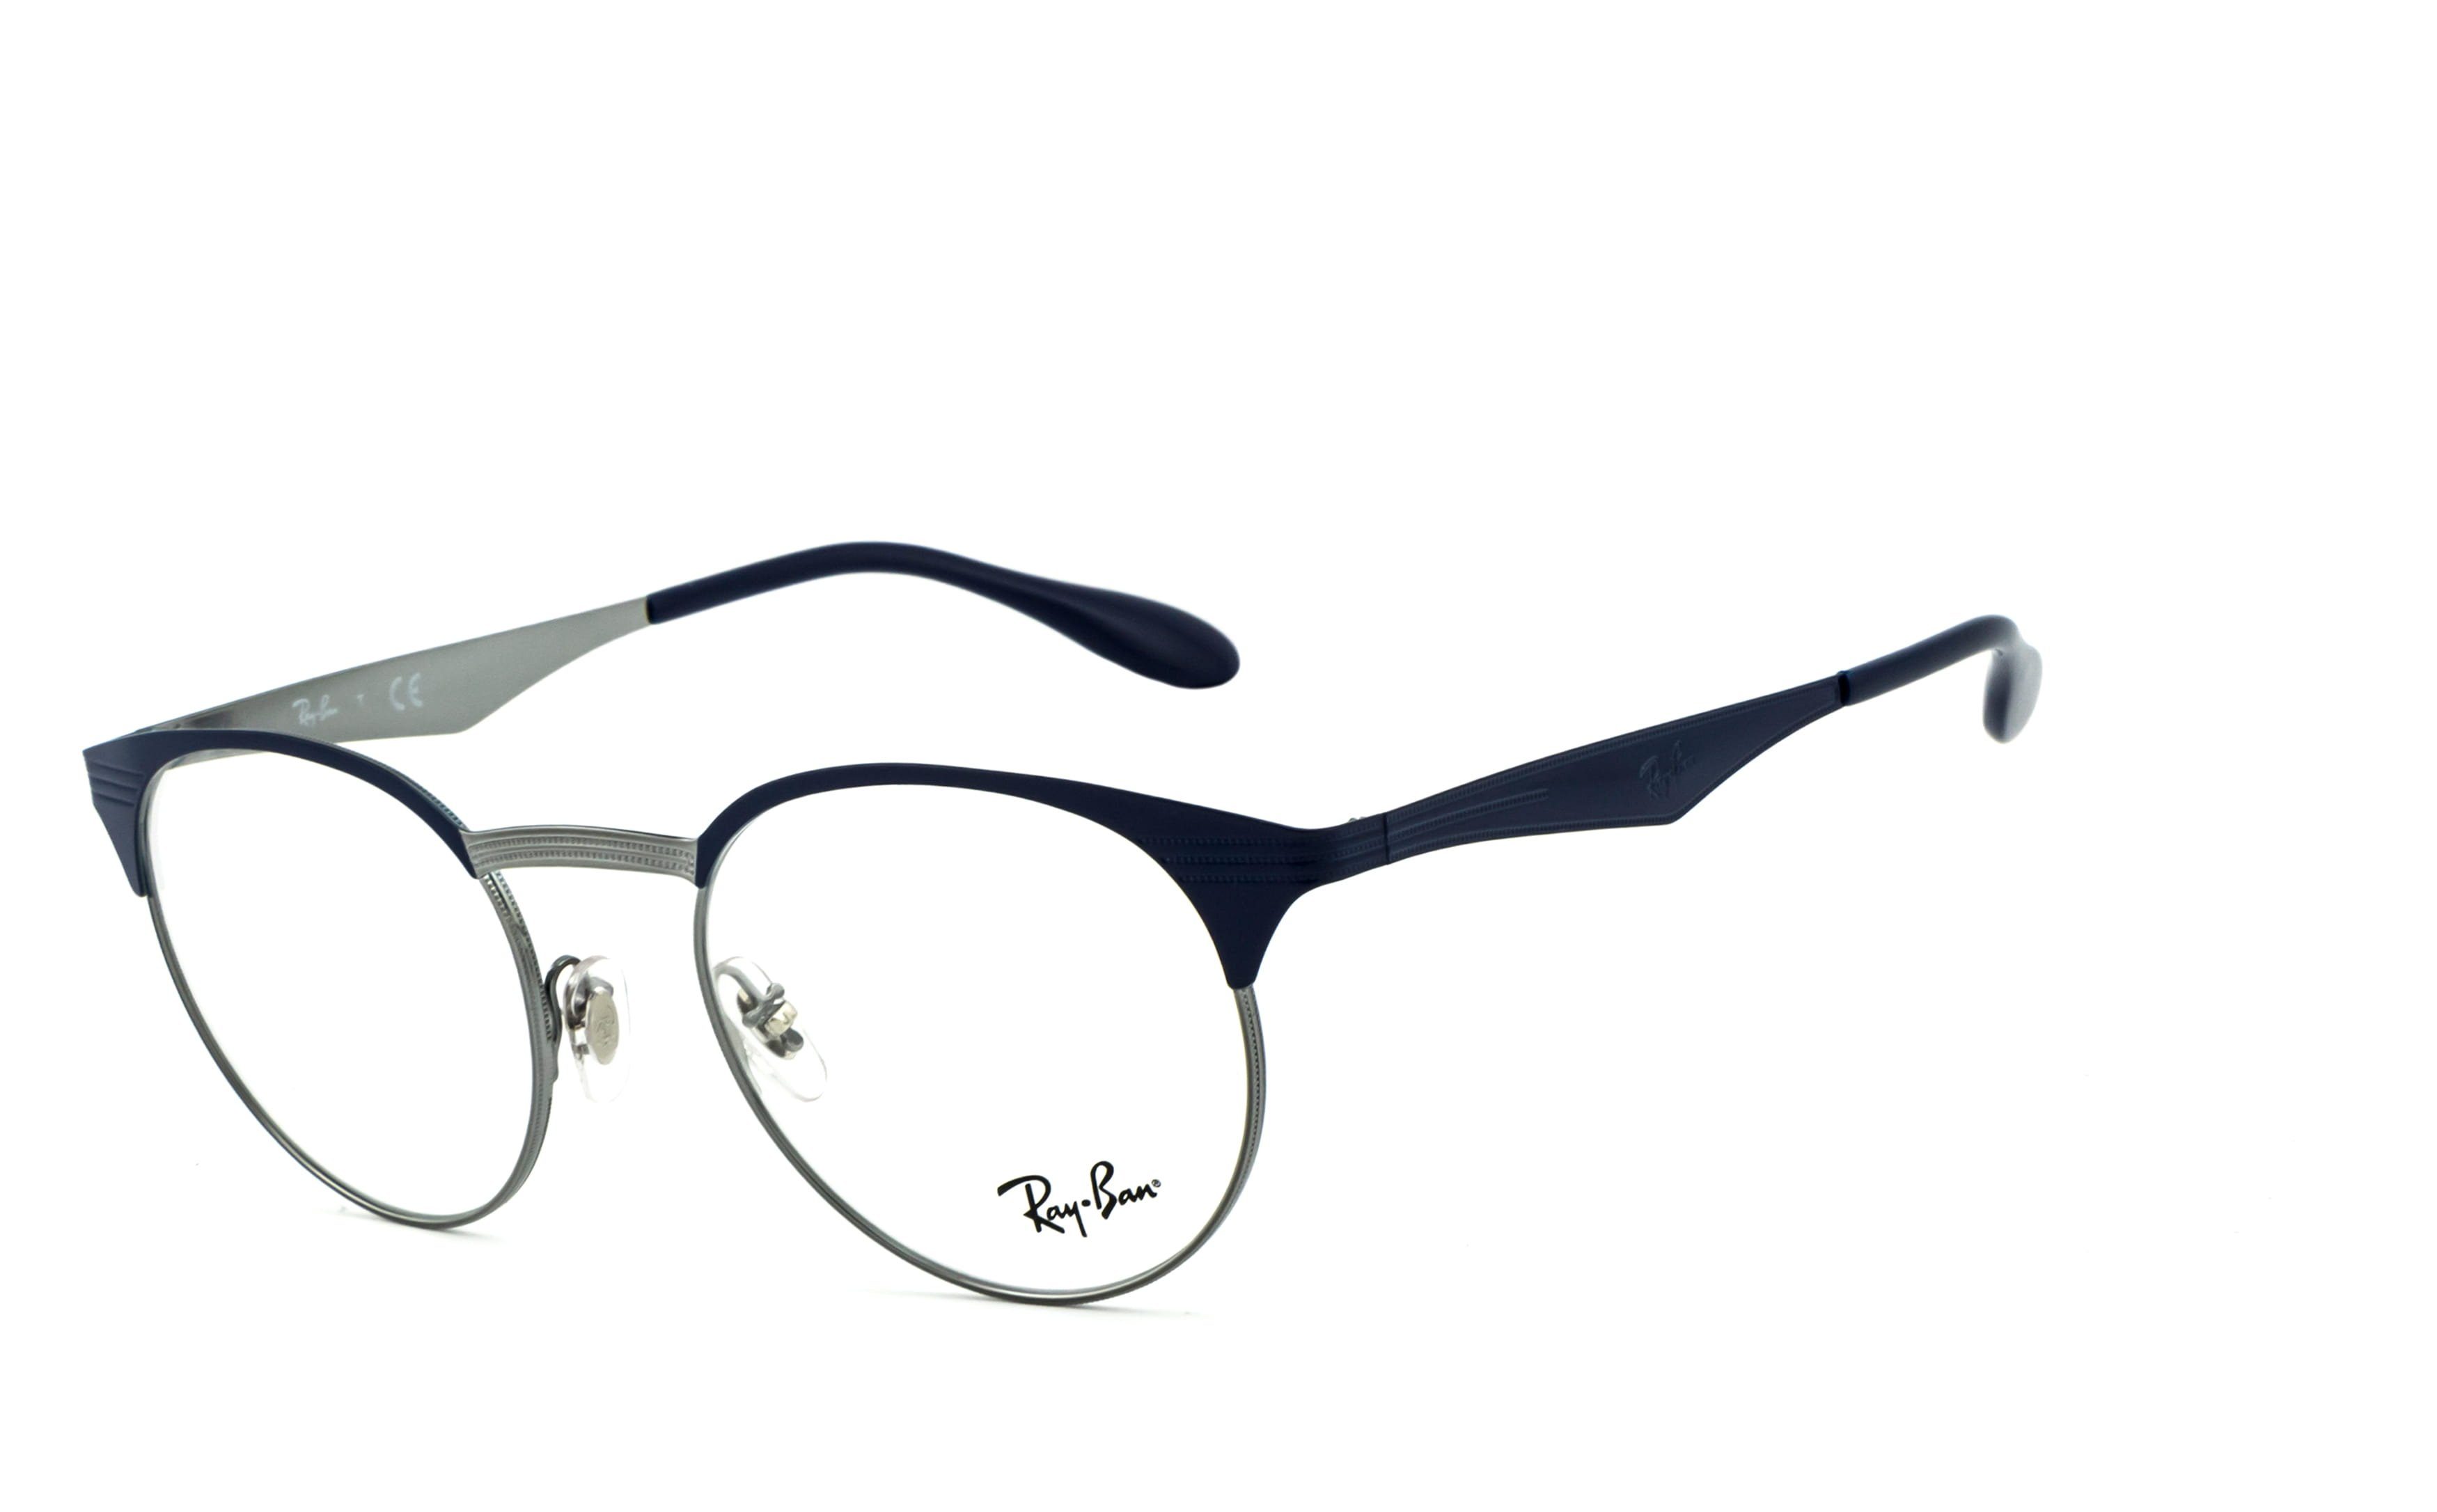 Ray-Ban Brille RB6406gr-n